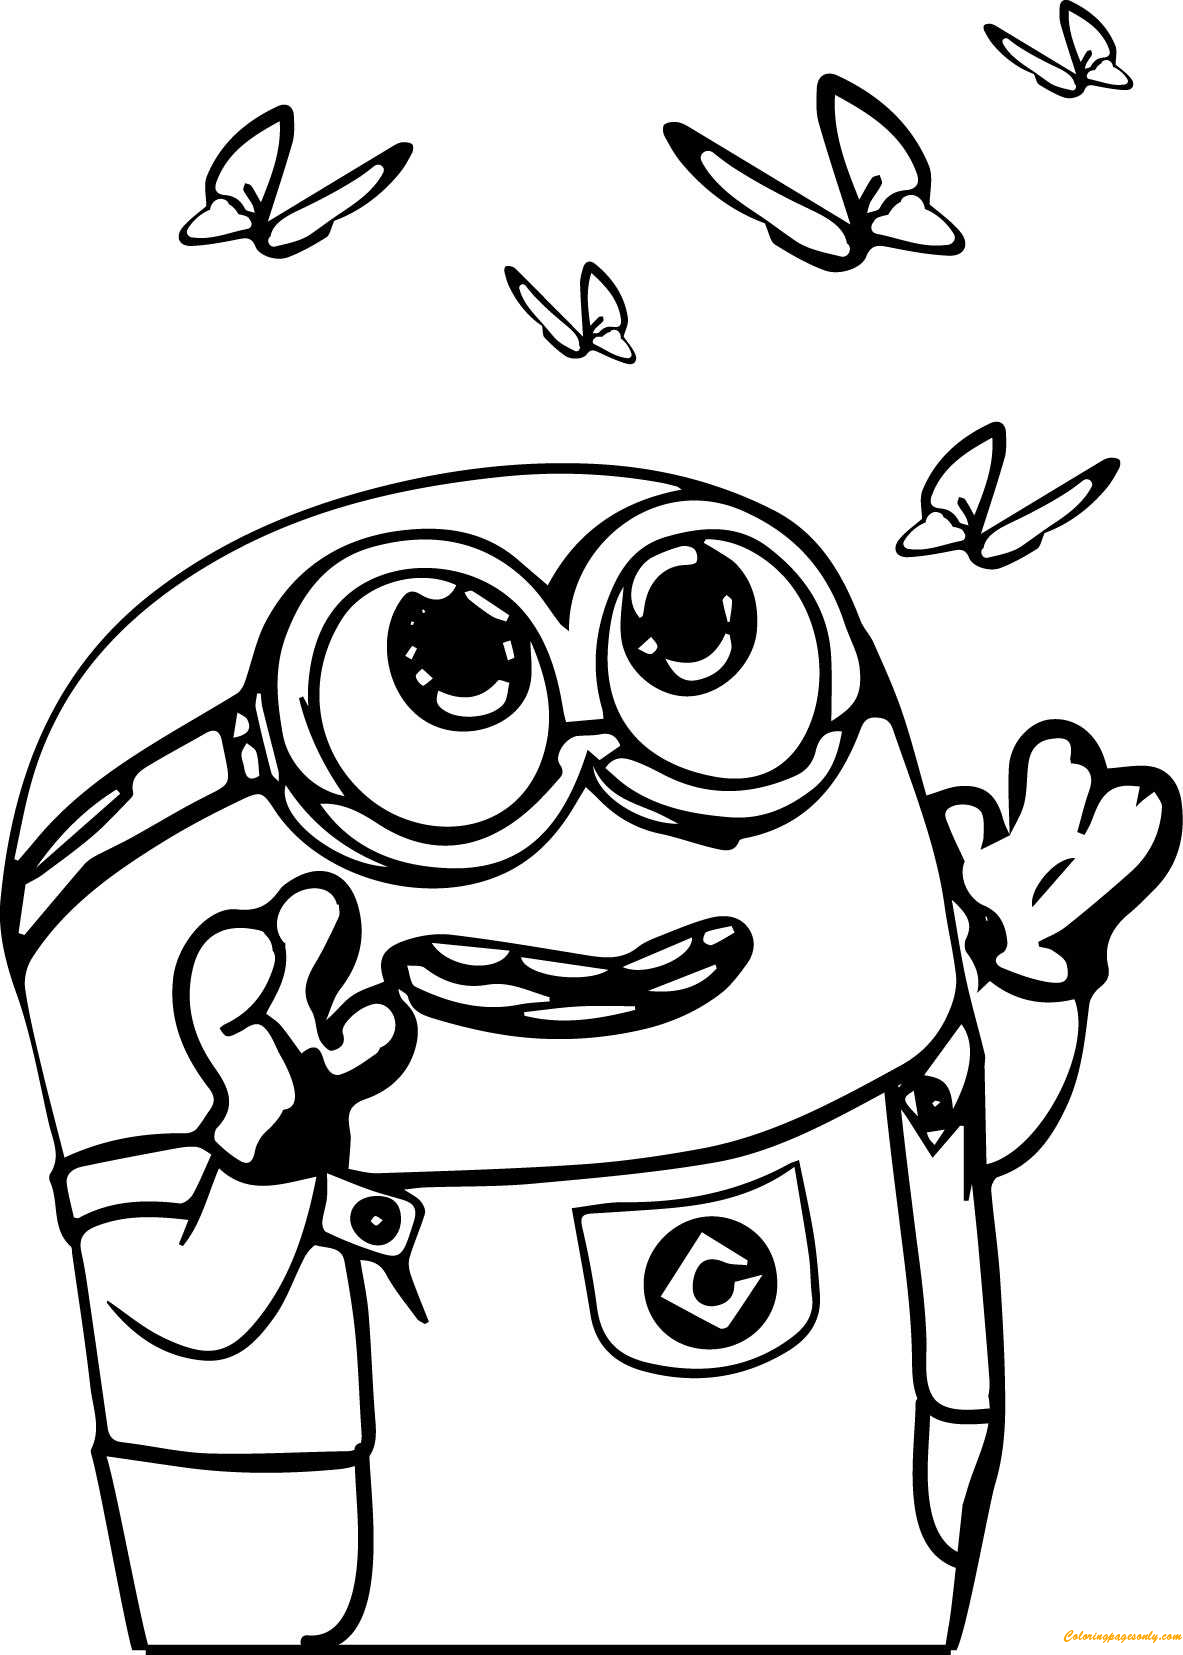 Goede Got Milk Minion Coloring Page - Free Coloring Pages Online XI-53